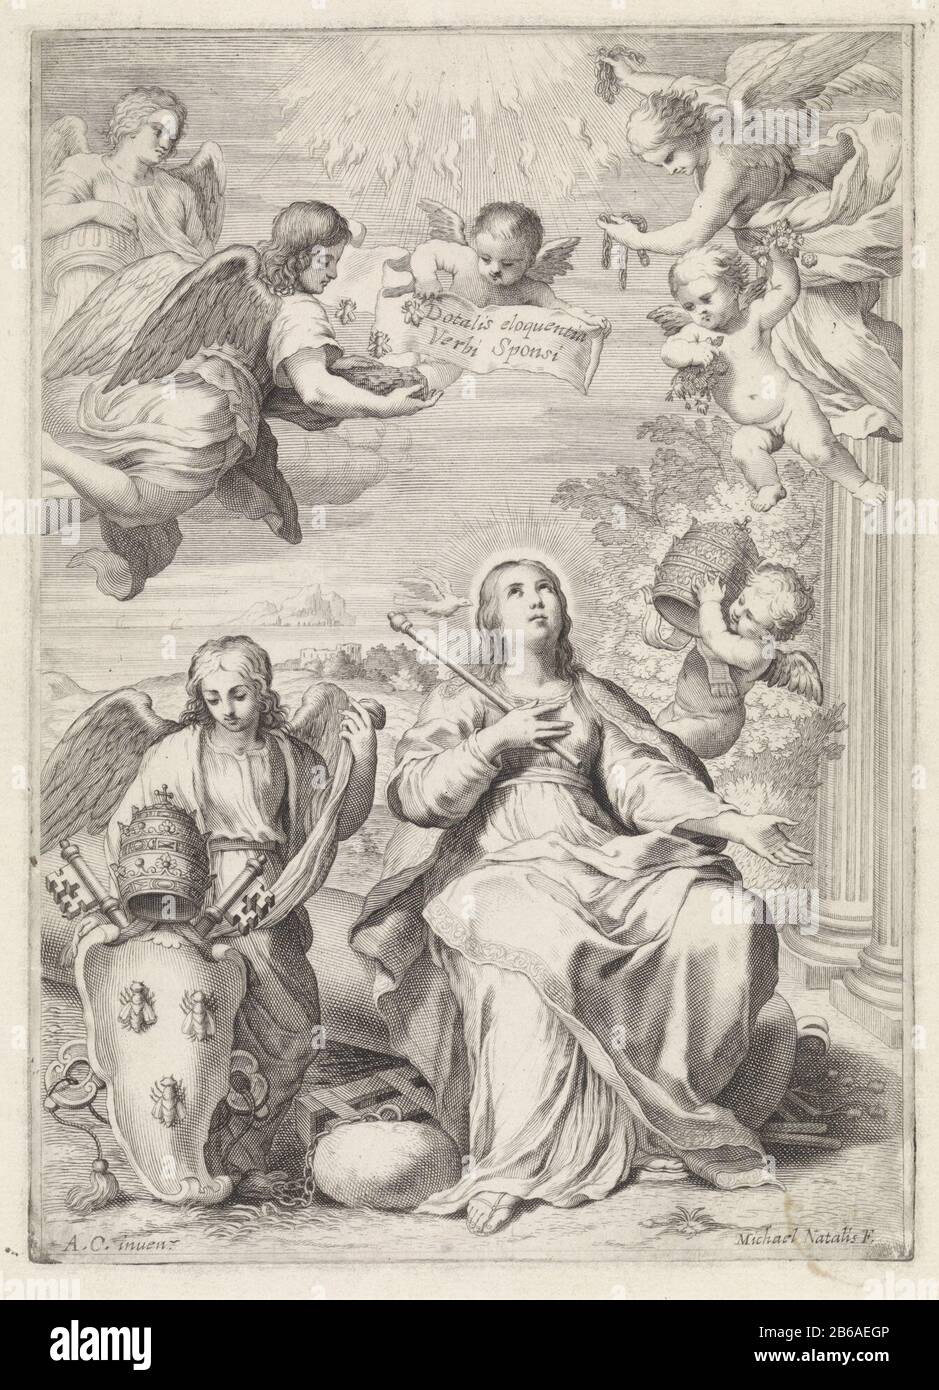 Allegoric op net pausschap Van Sophisticated 8 Dotalis eloquent word bride (titel op object) An angel supports the papal coat of arms of Pope Urban VIII. In addition, a woman with scepter, the personification of the Church, sitting on a fallen pillar, a stone with a chain beside her right foot out. A putto will fly to the Church crowned with the papal tiara. Moreover angels fly, where: one with an inverted vase, one with a boulder and three bees and one with broken chains in their hands. A putto carrying a scroll with the words Dotalis loquaciousness verbi sponsi. Another putto holding roses s Stock Photo